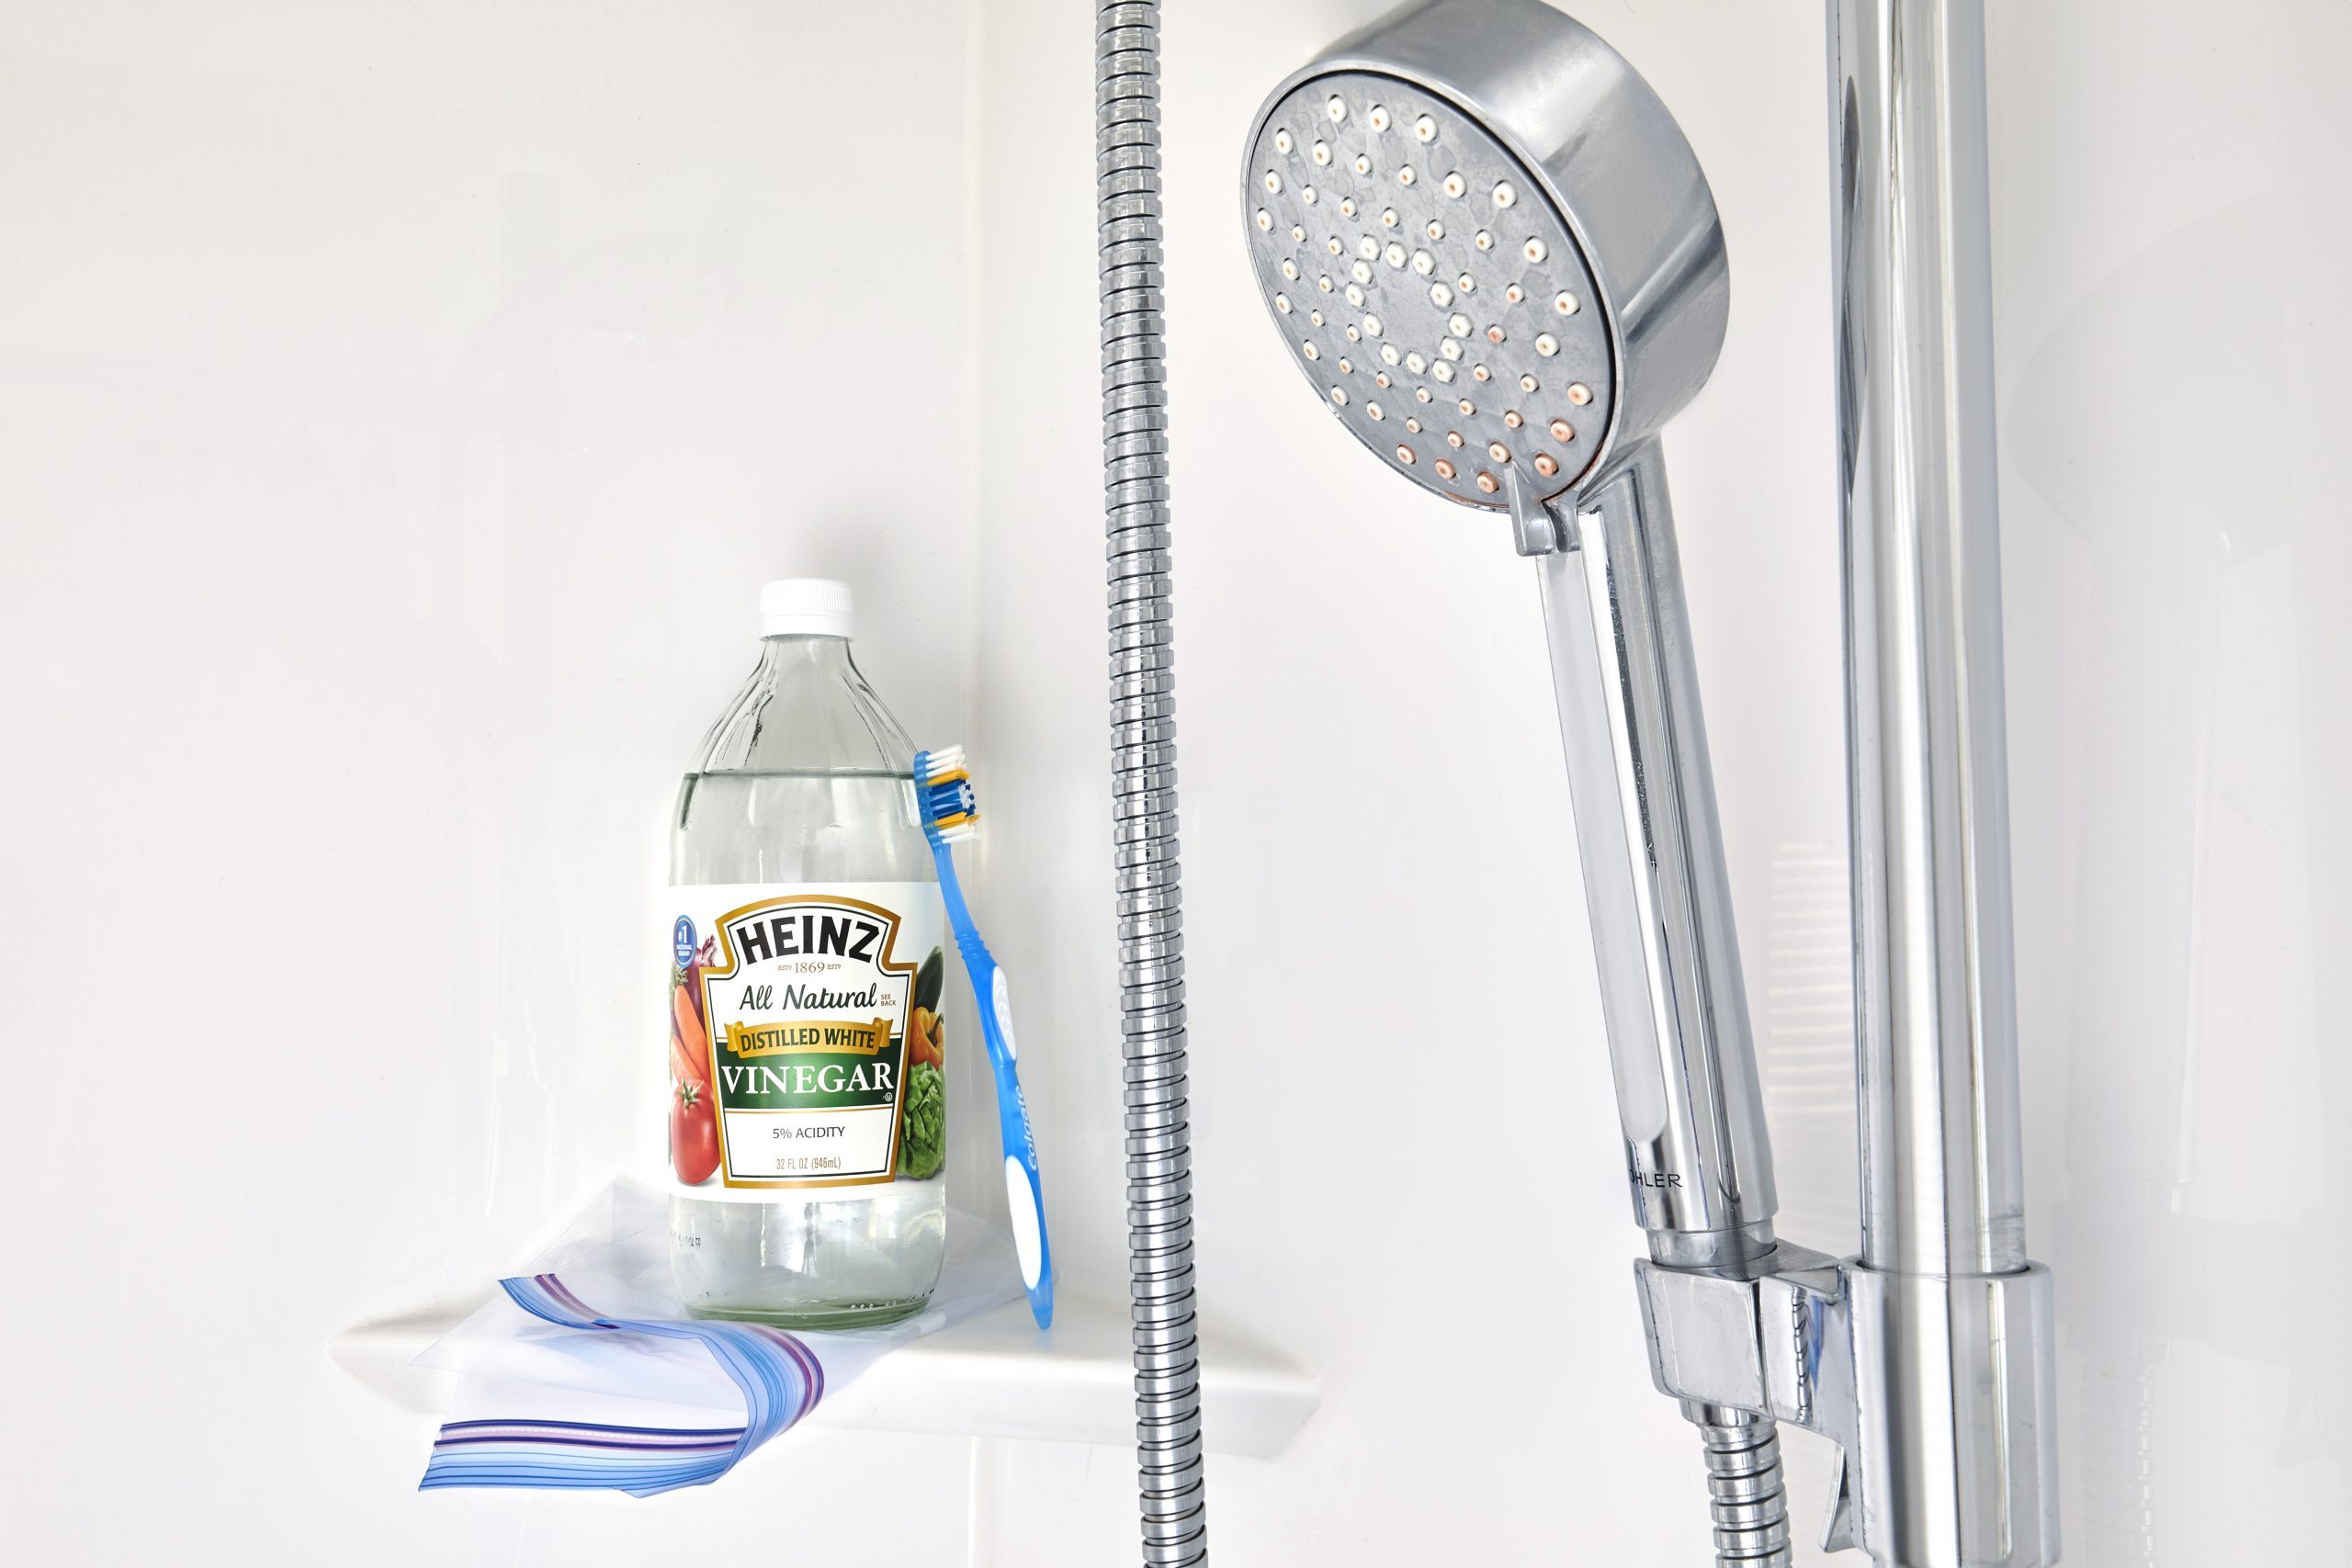 How to Clean a Shower Head: Guide